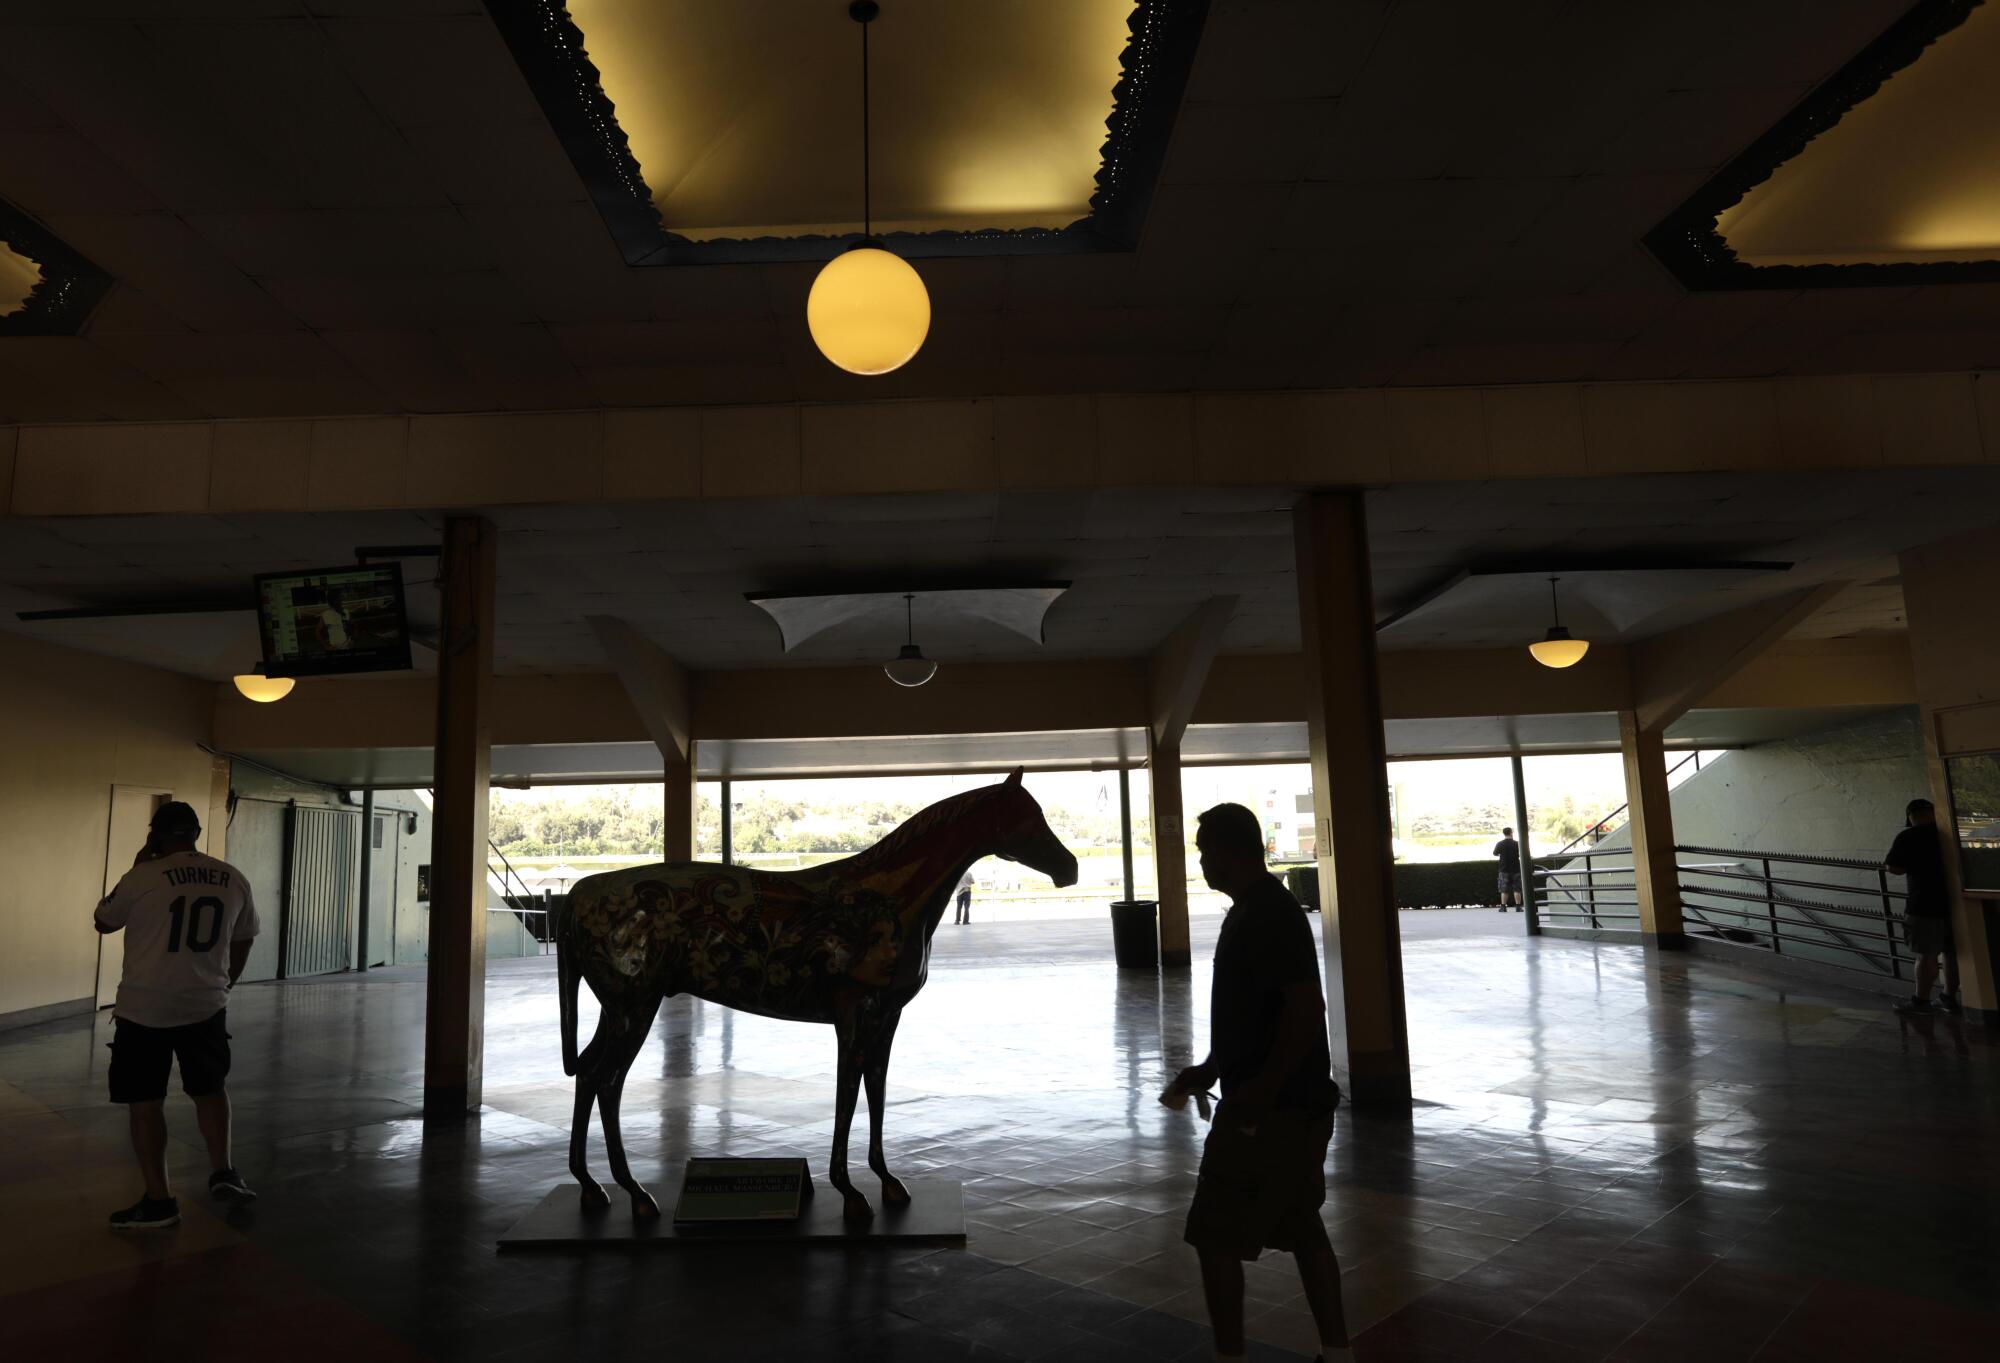 Visitors make their way past a sculpture of a horse that features the artwork of Michael Massenburg.